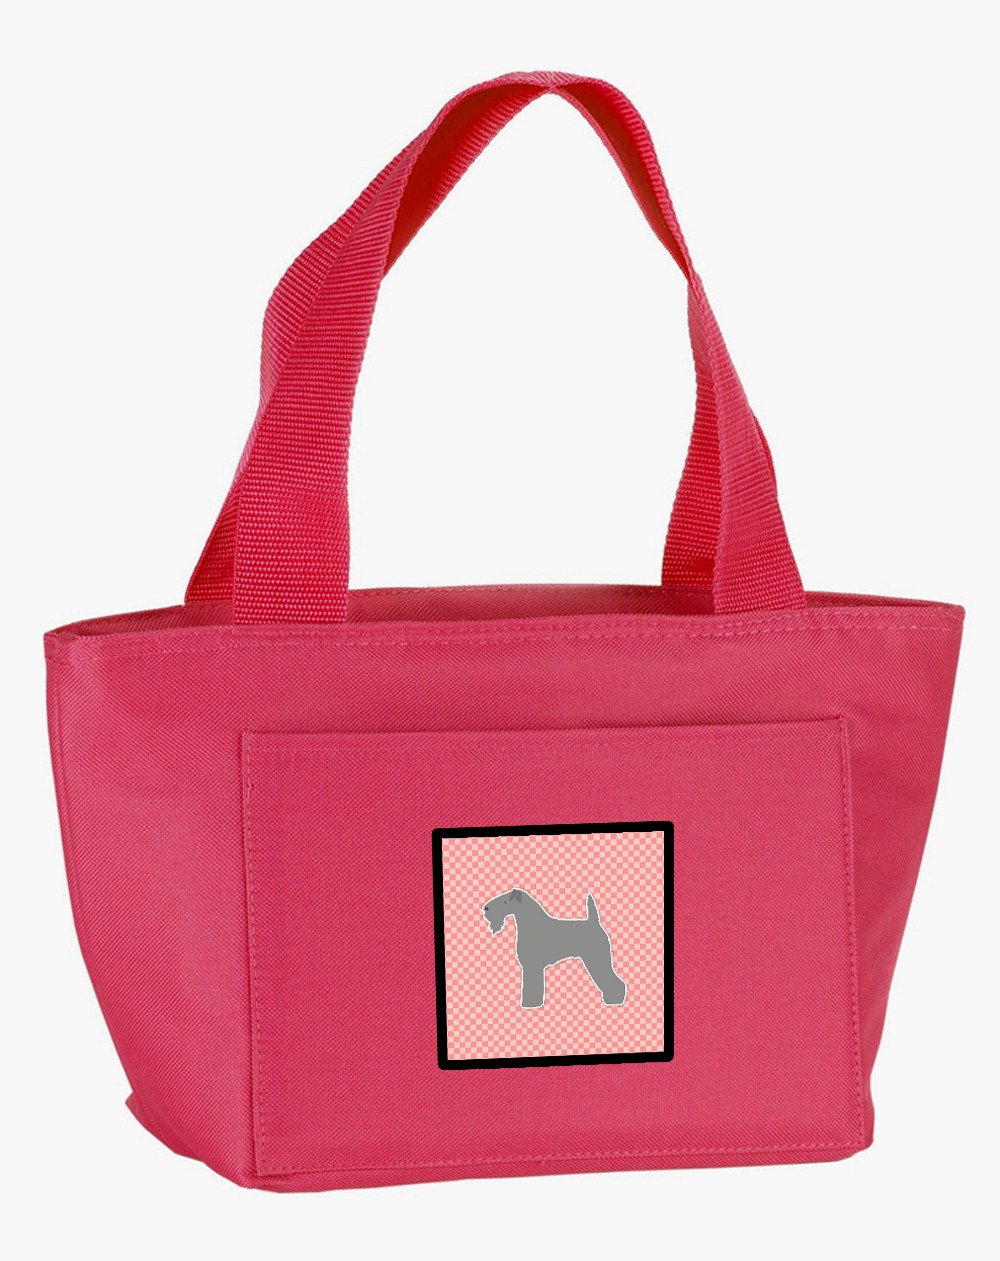 Kerry Blue Terrier Checkerboard Pink Lunch Bag BB3592PK-8808 by Caroline's Treasures